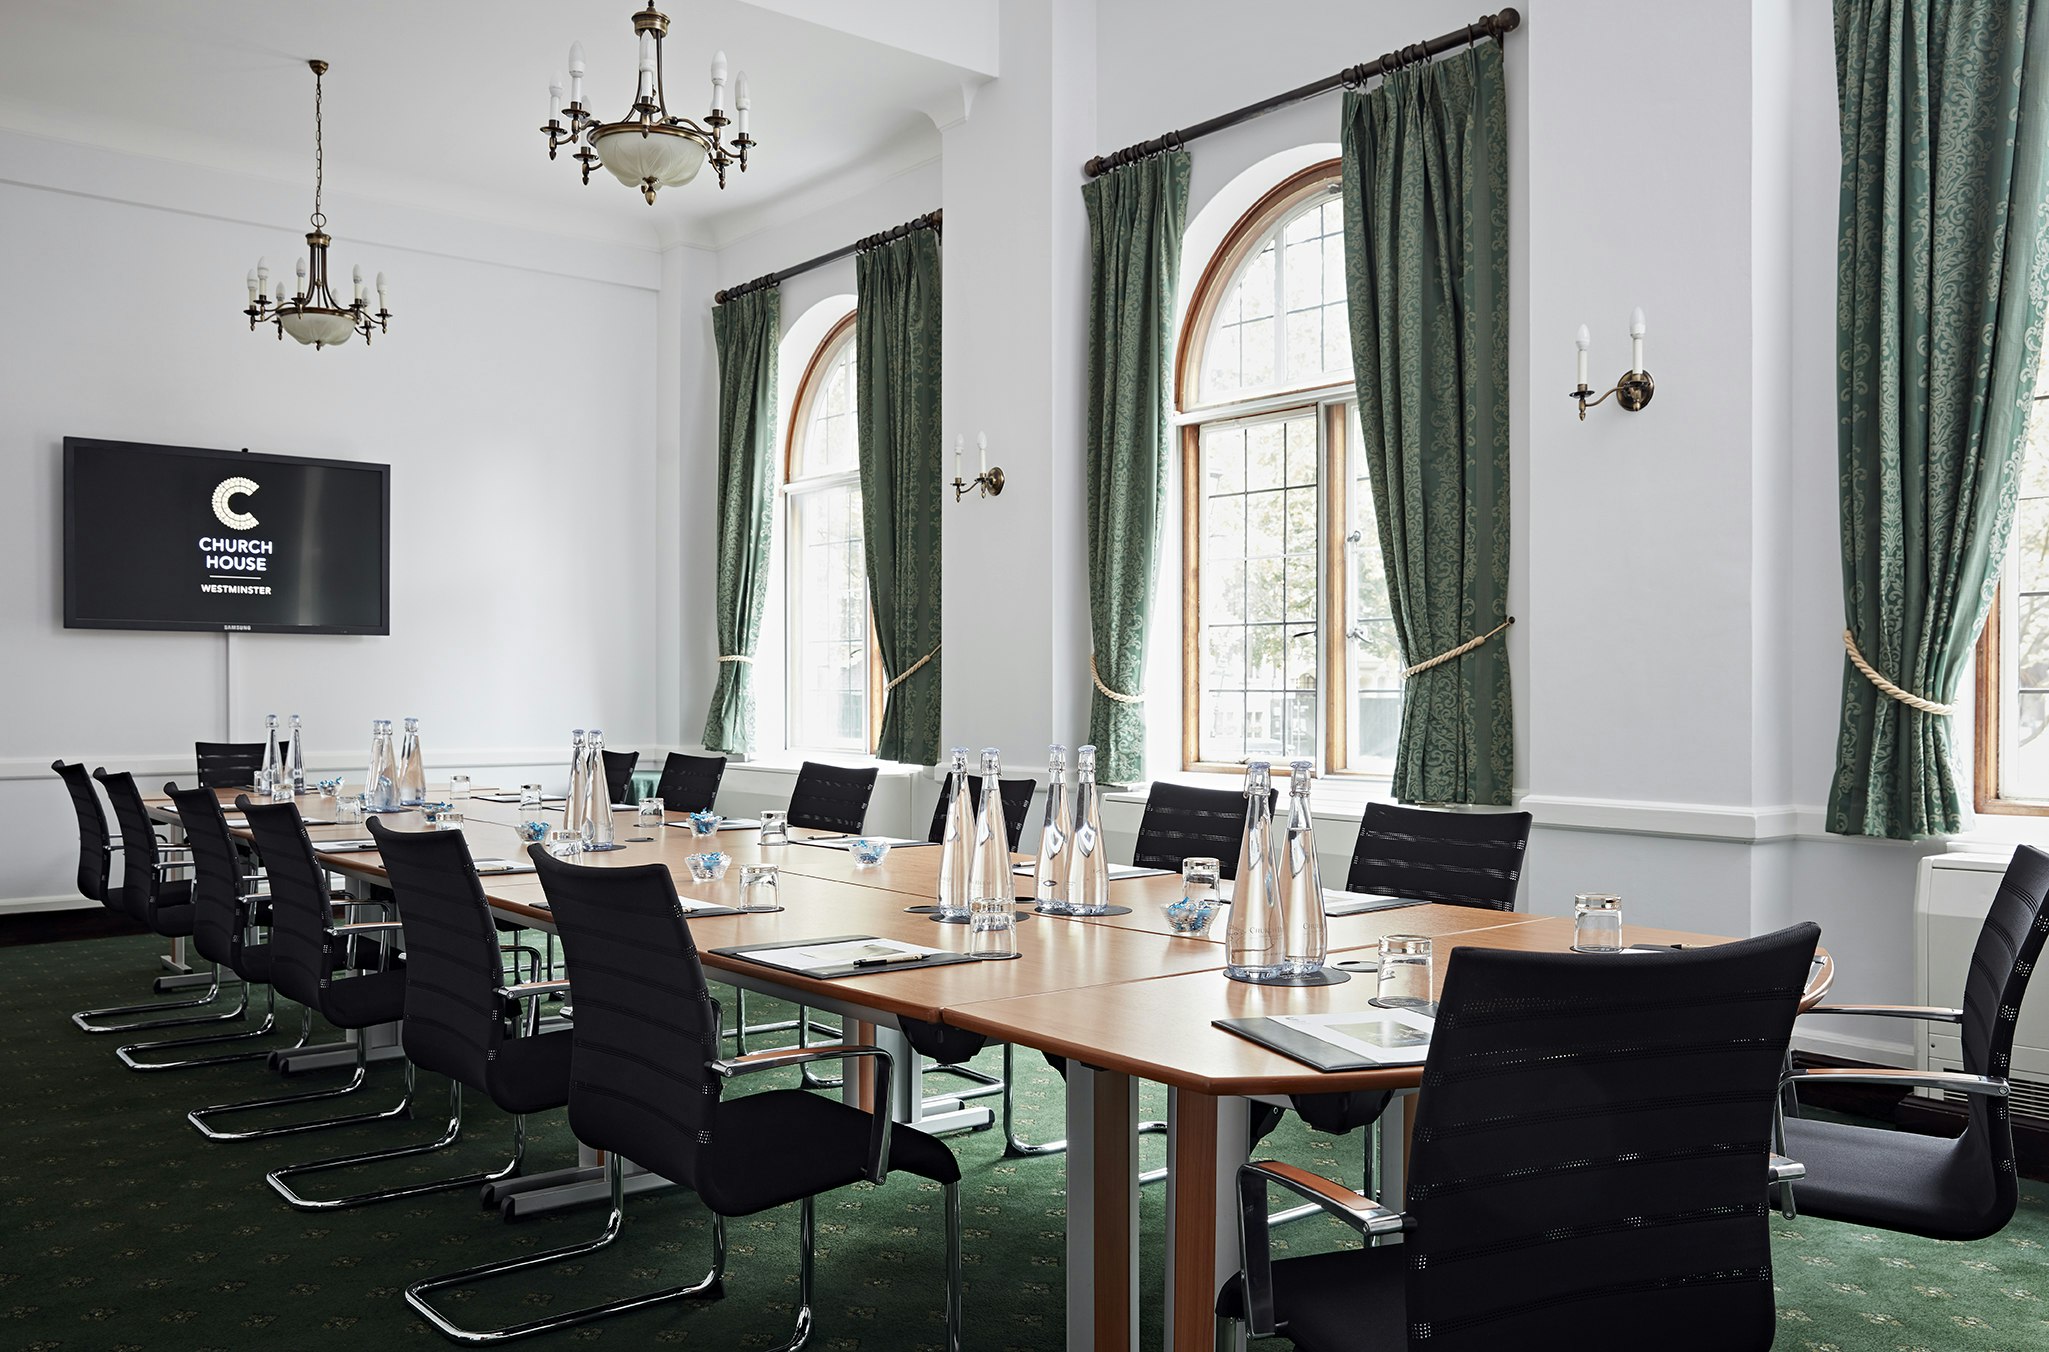 Hybrid Event Venues in London - Church House Westminster